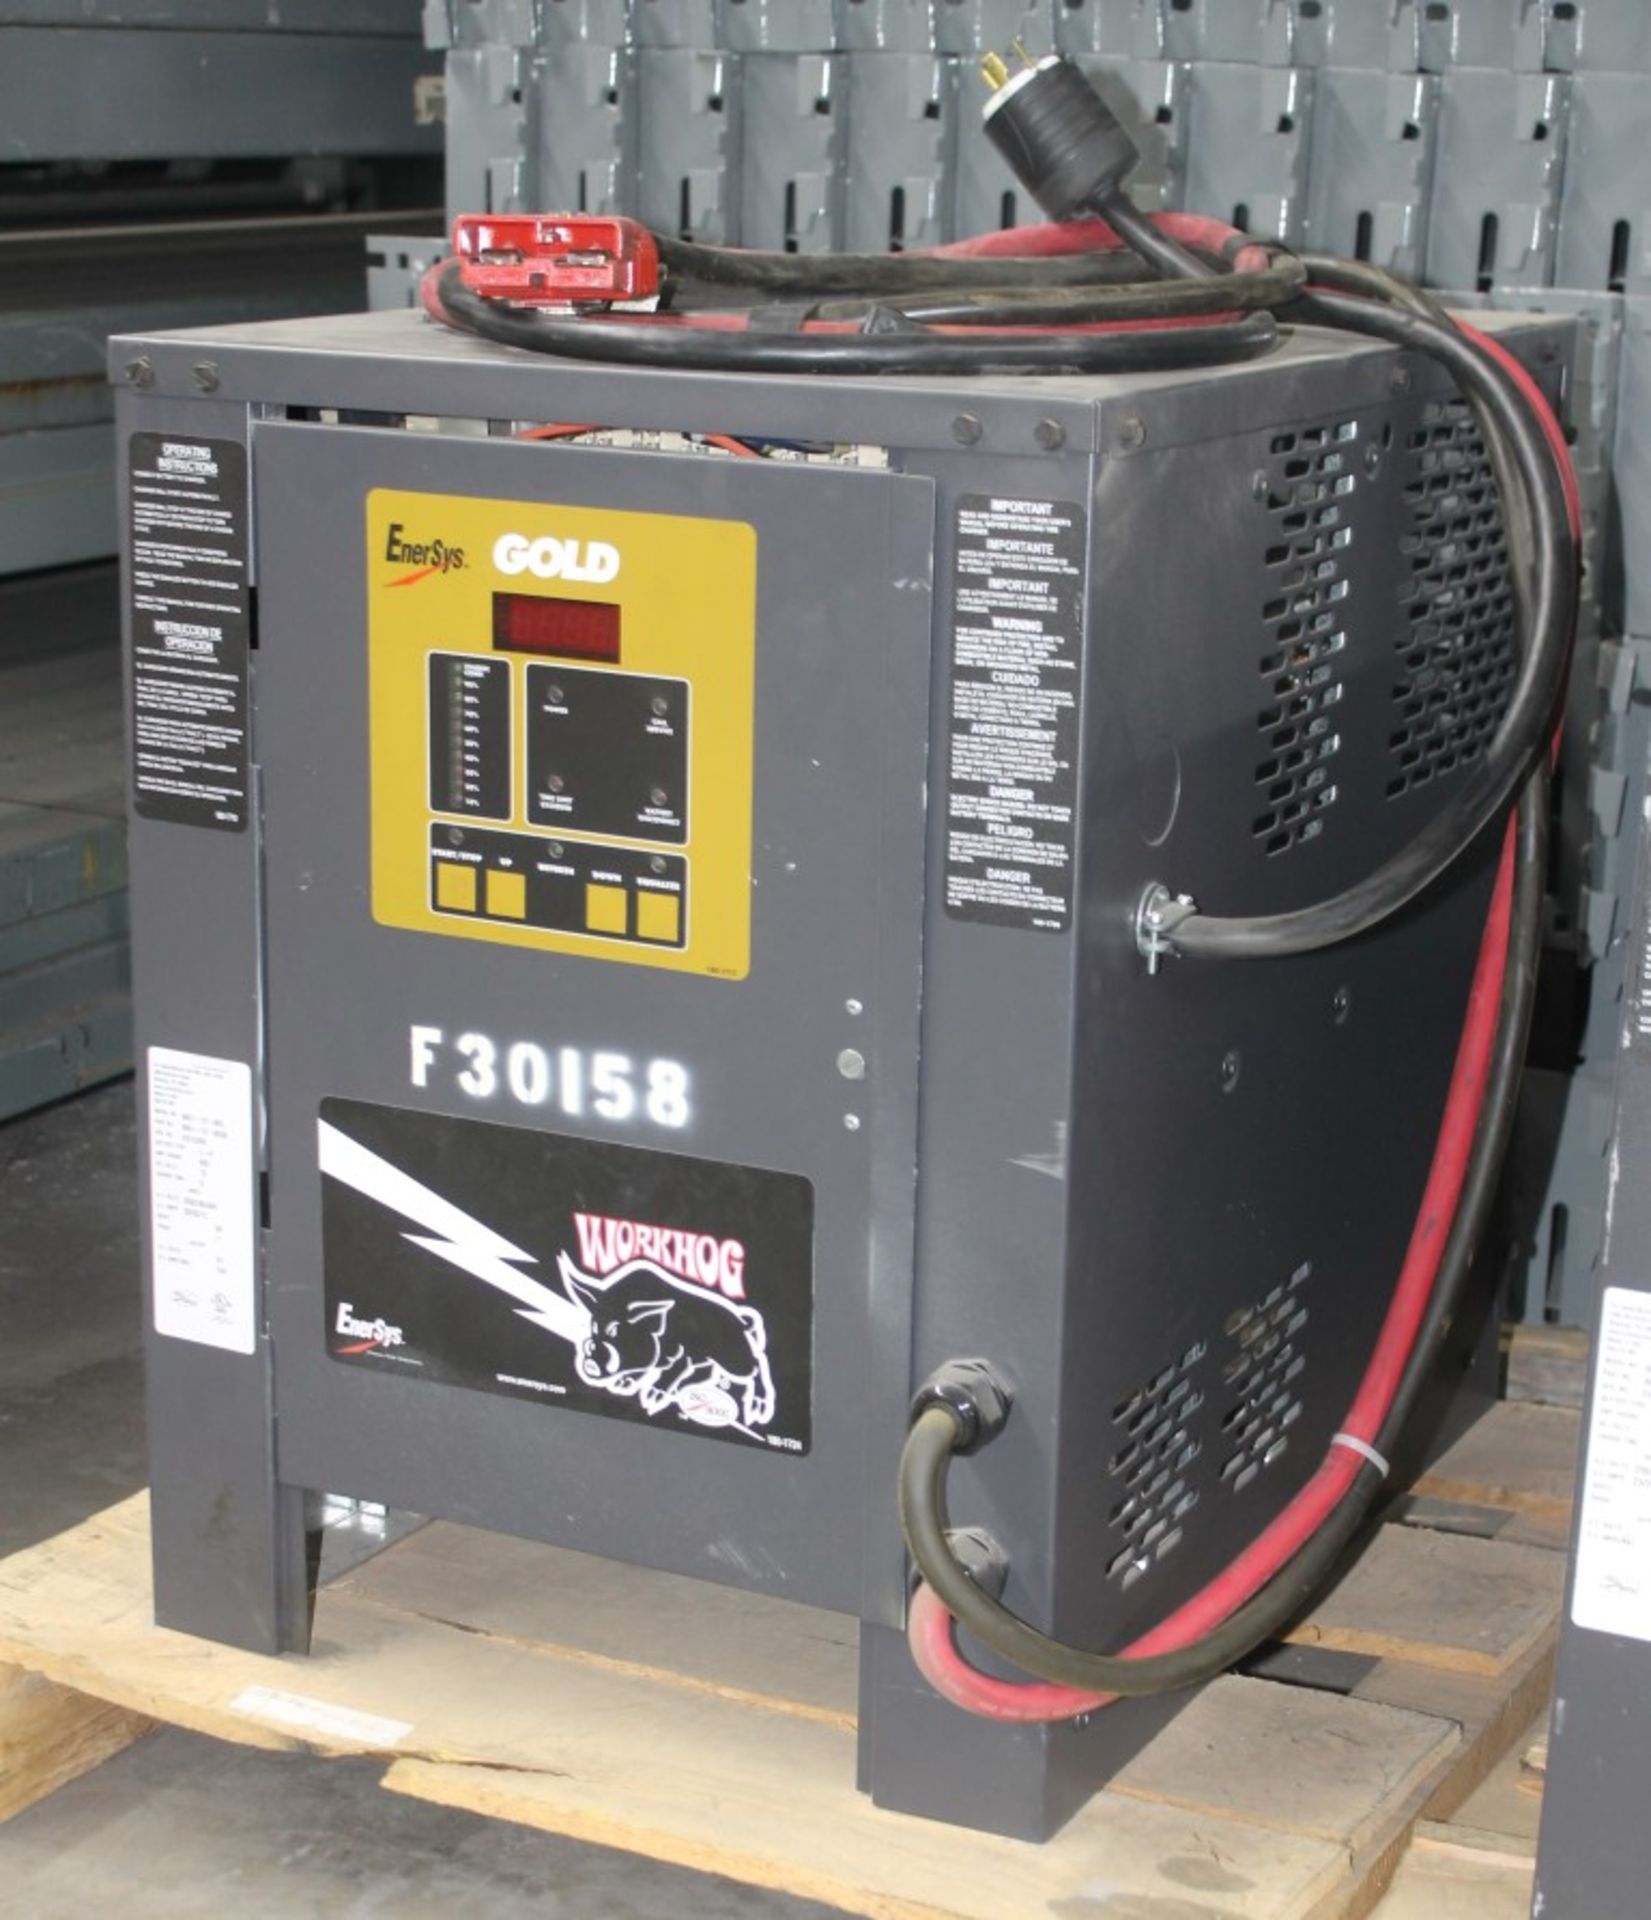 ENERSYS GOLD 24 VOLTS BATTERY CHARGER, - Image 4 of 4